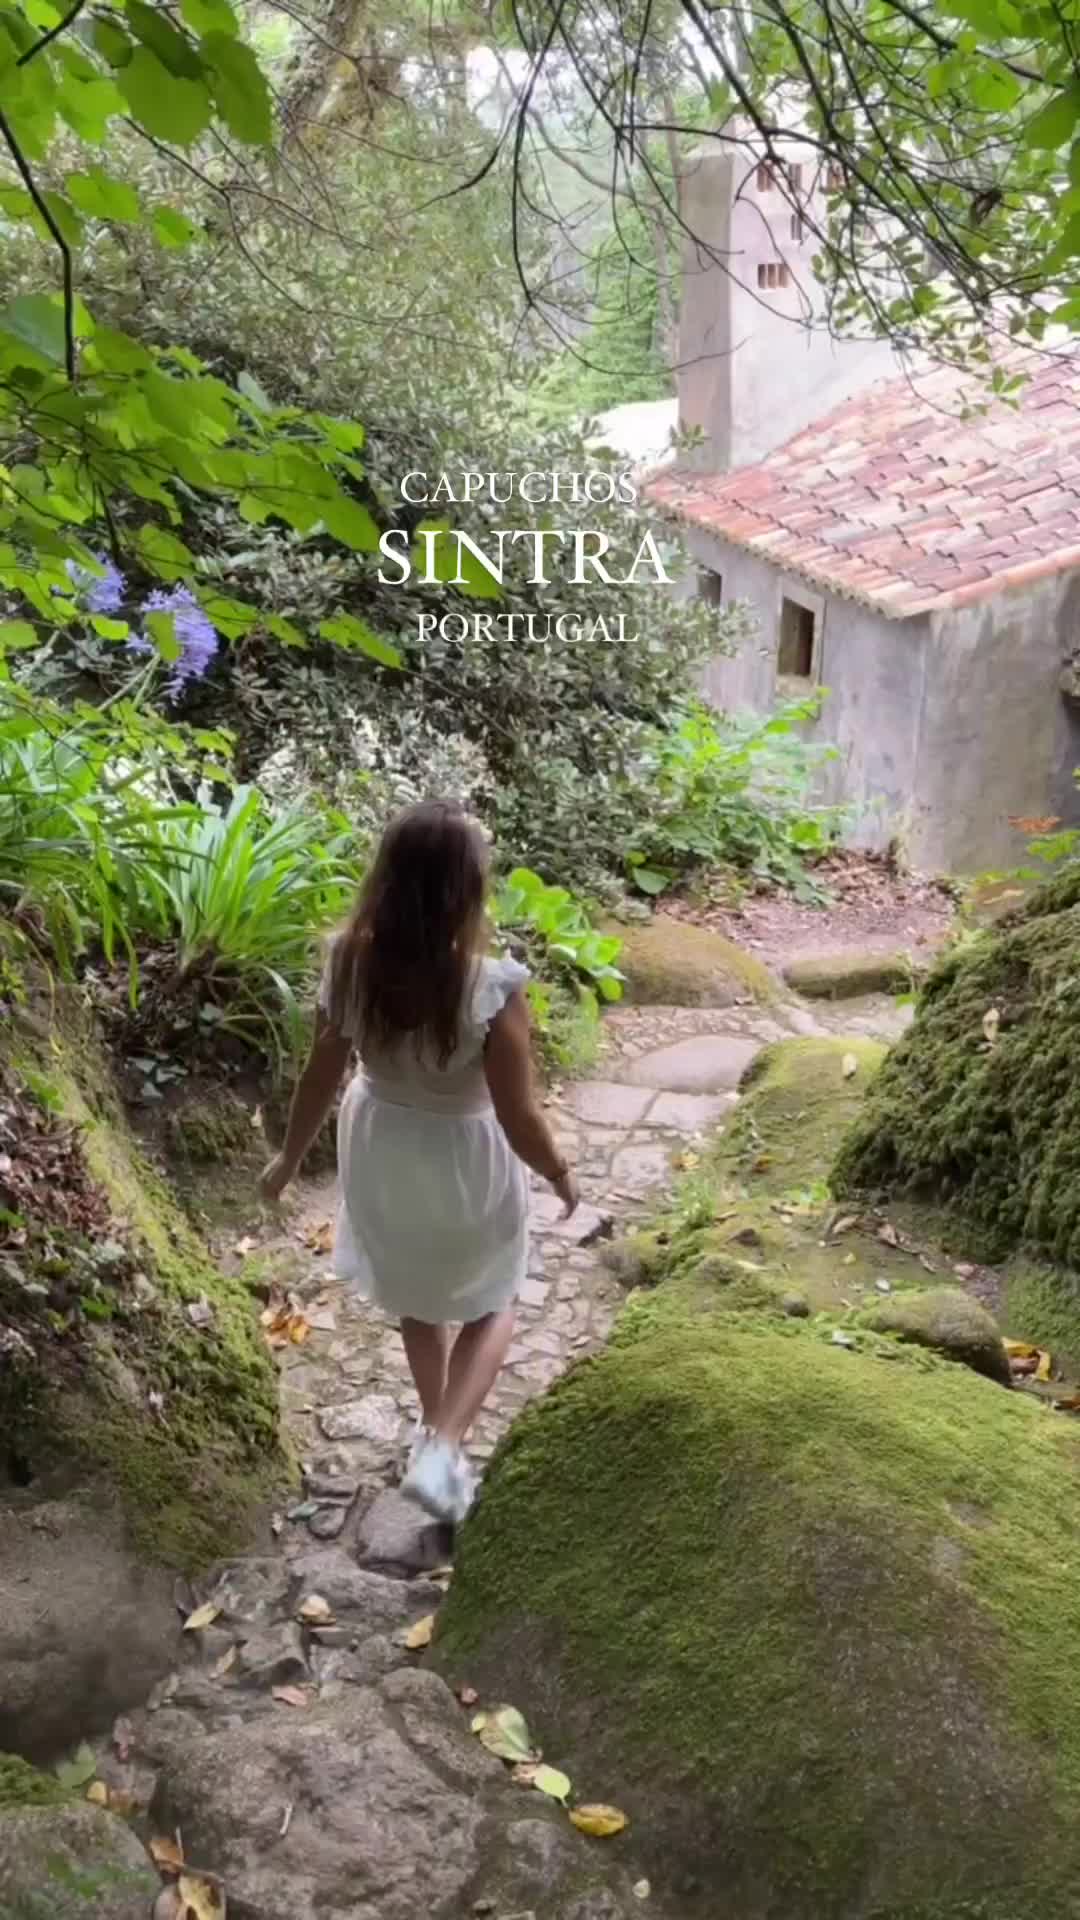 Discover the Historic Convent of Capuchos in Sintra